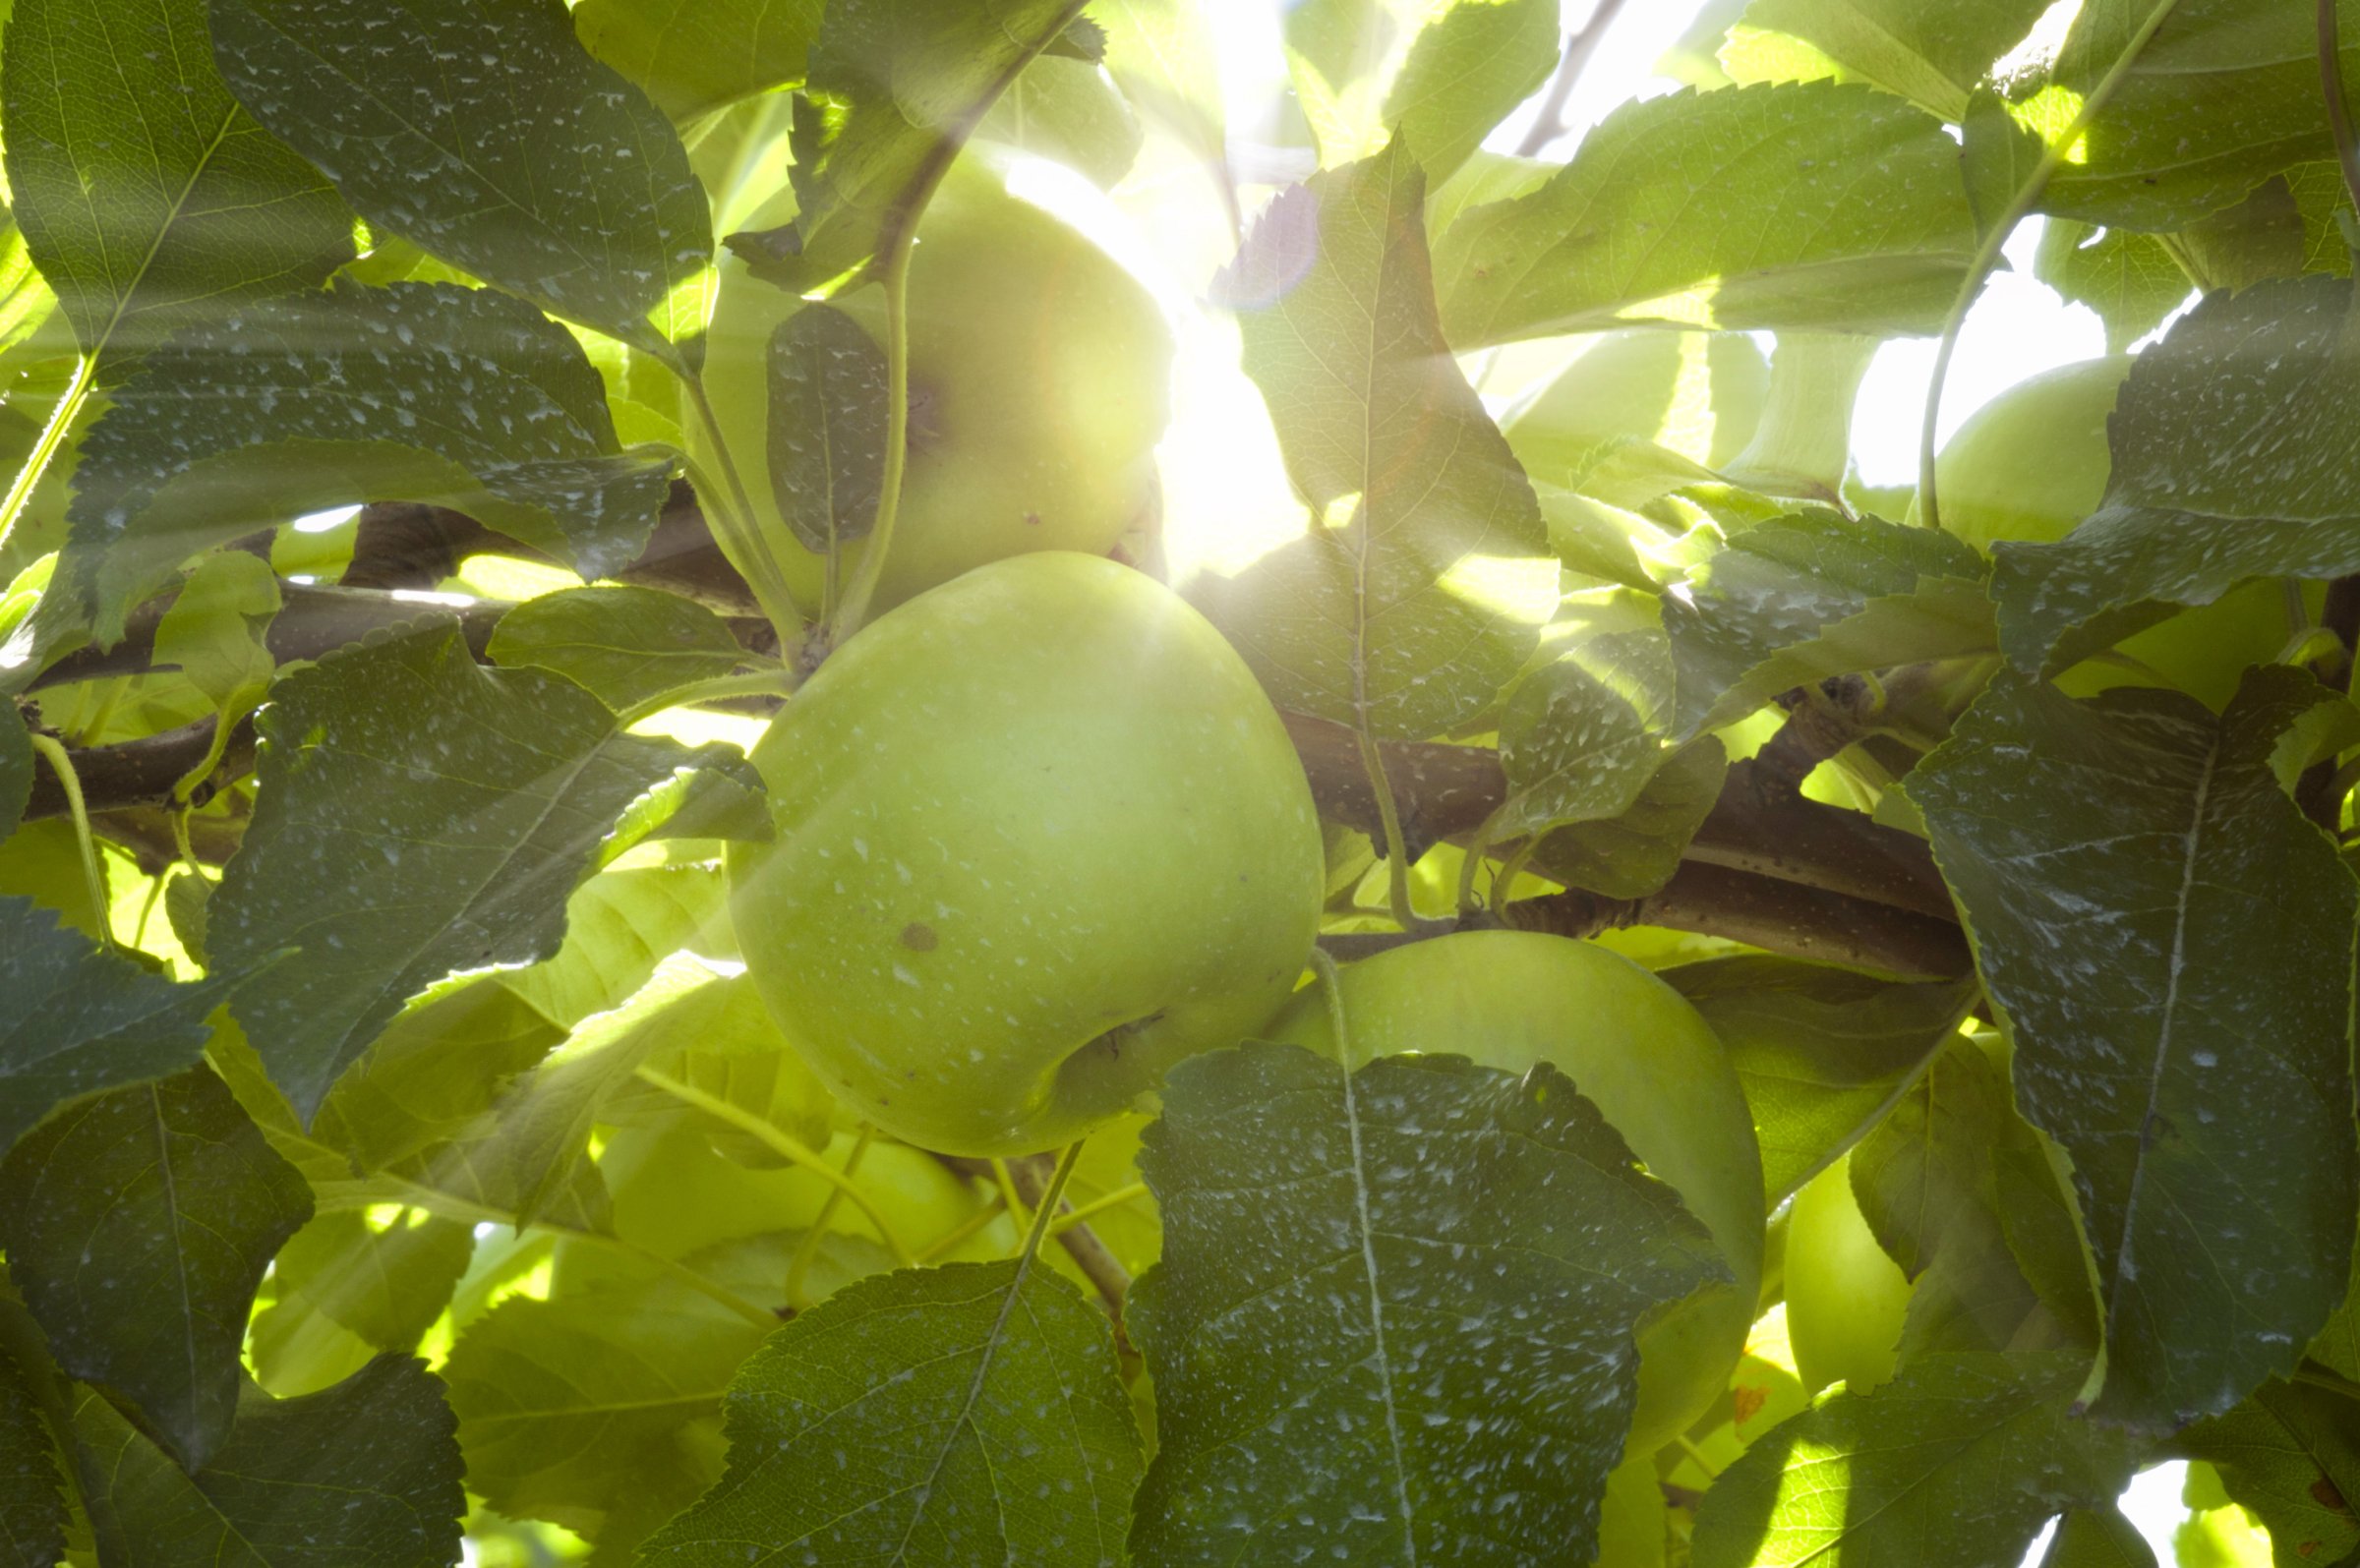 Green apples in the sunlight